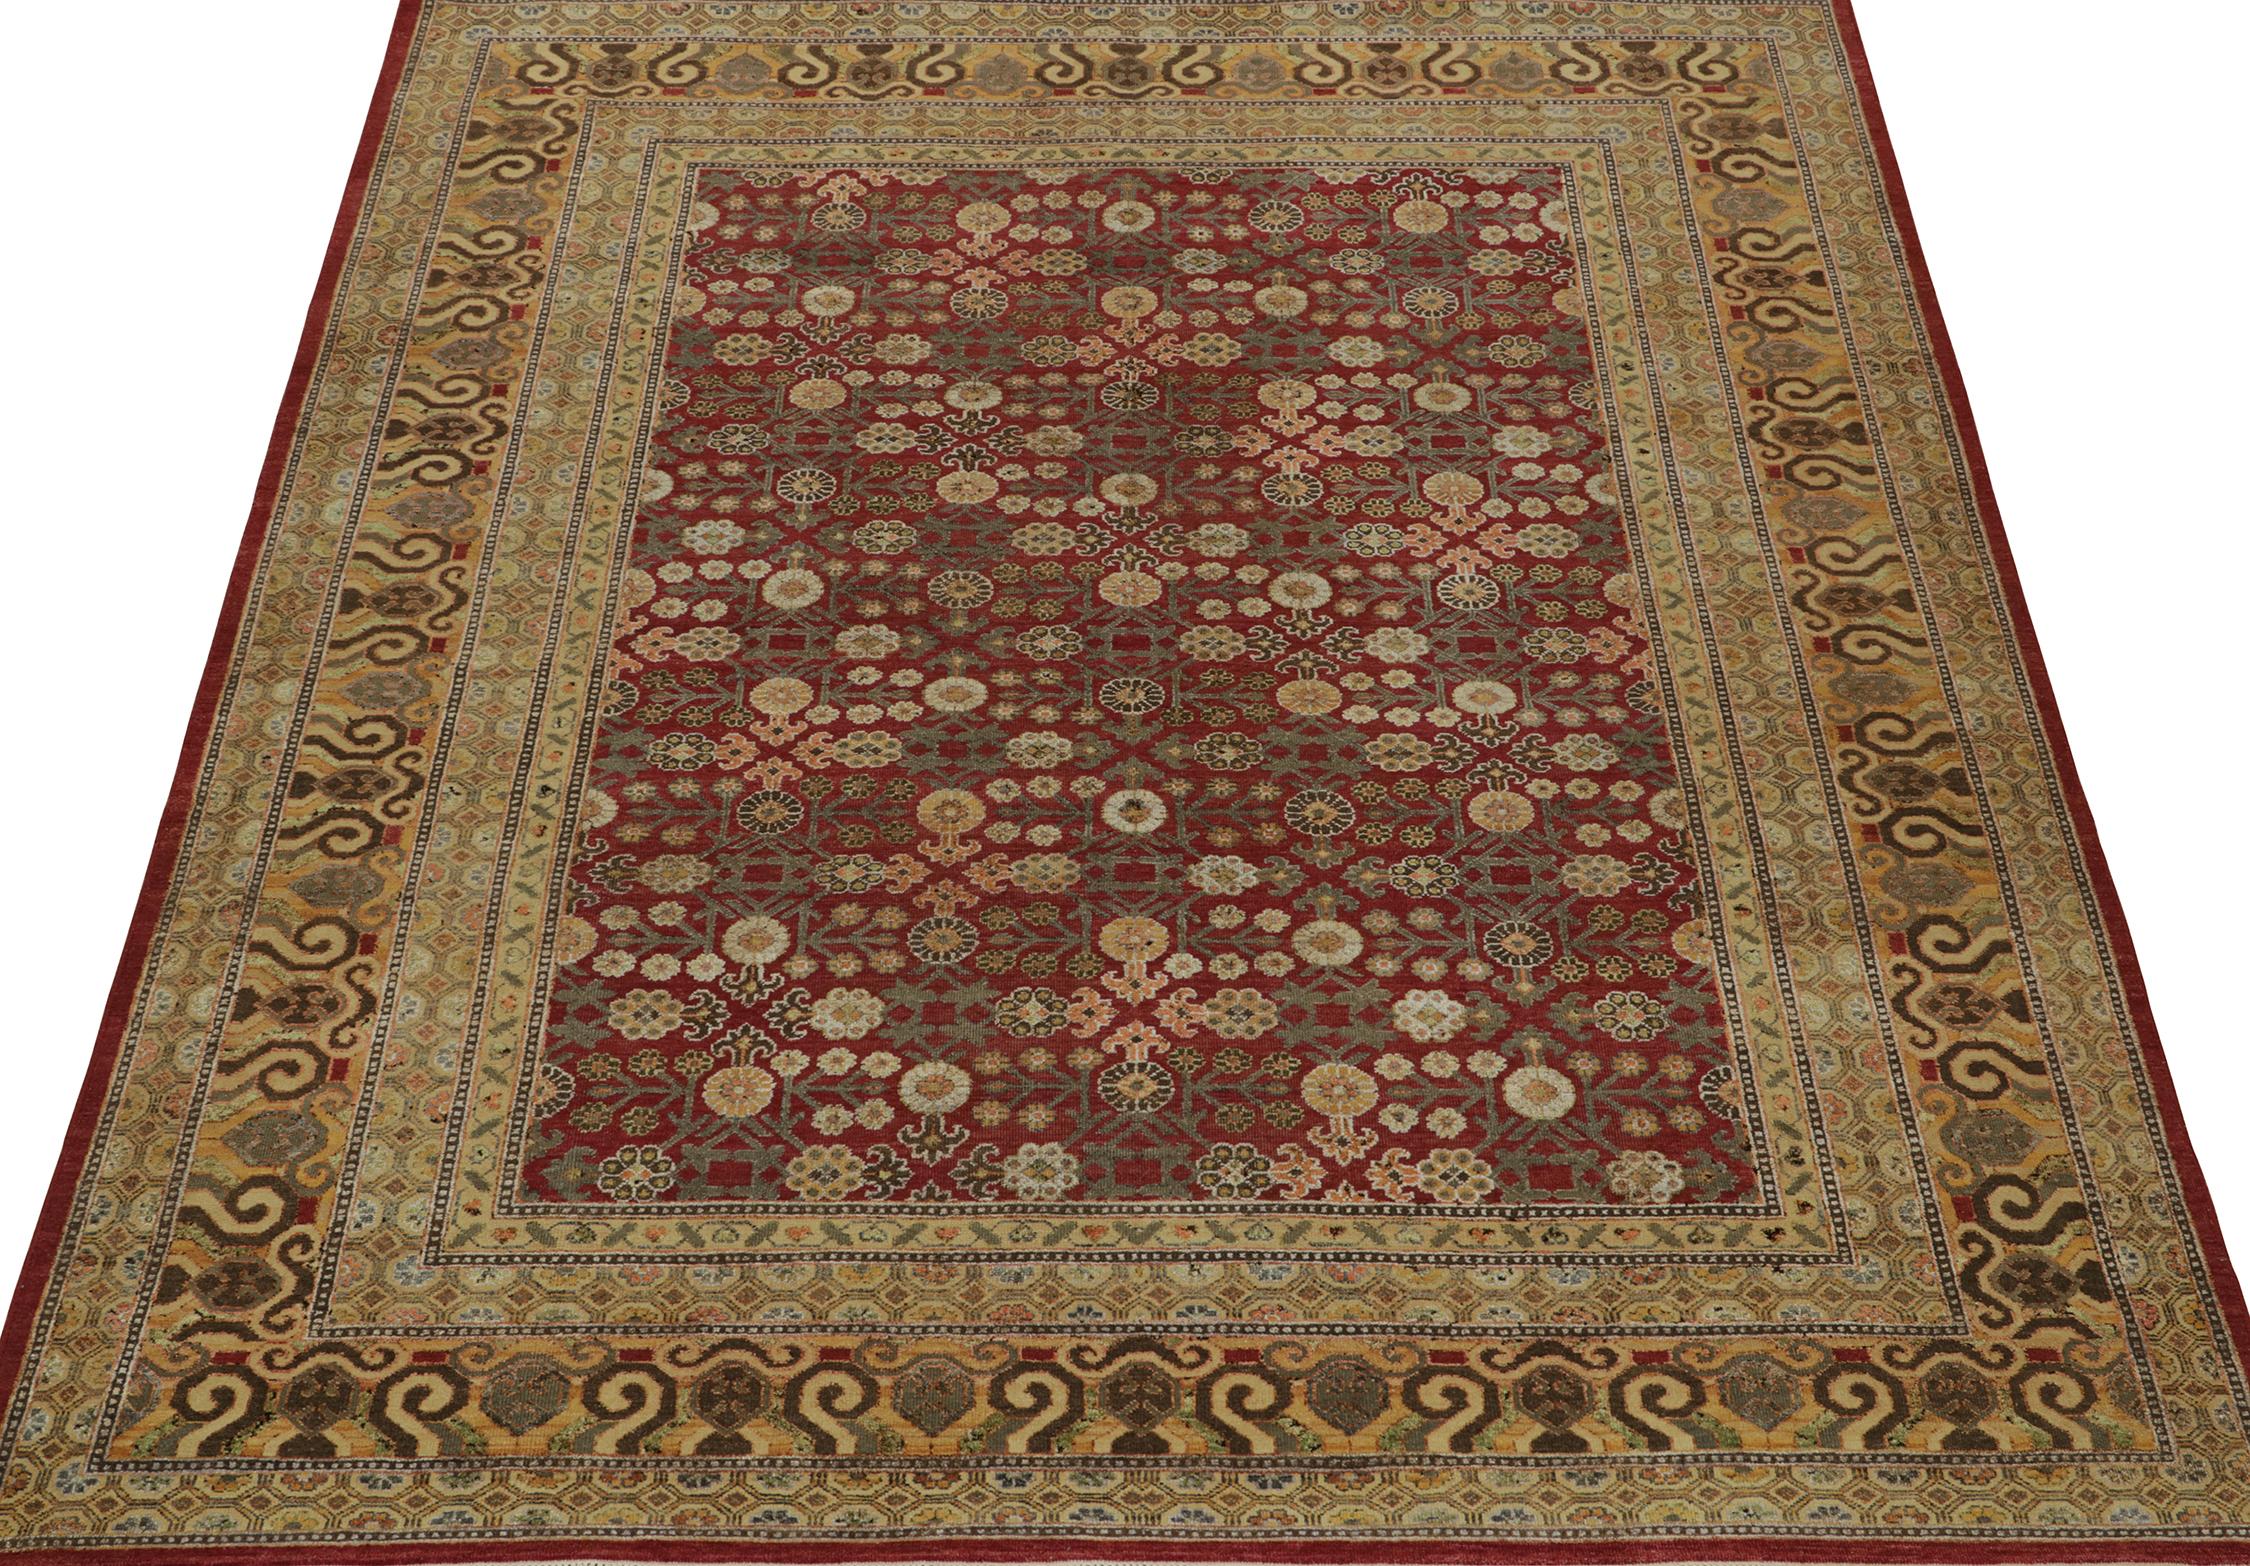 Indian Rug & Kilim’s Khotan Style Rug with Maroon and Gold with Floral Patterns For Sale